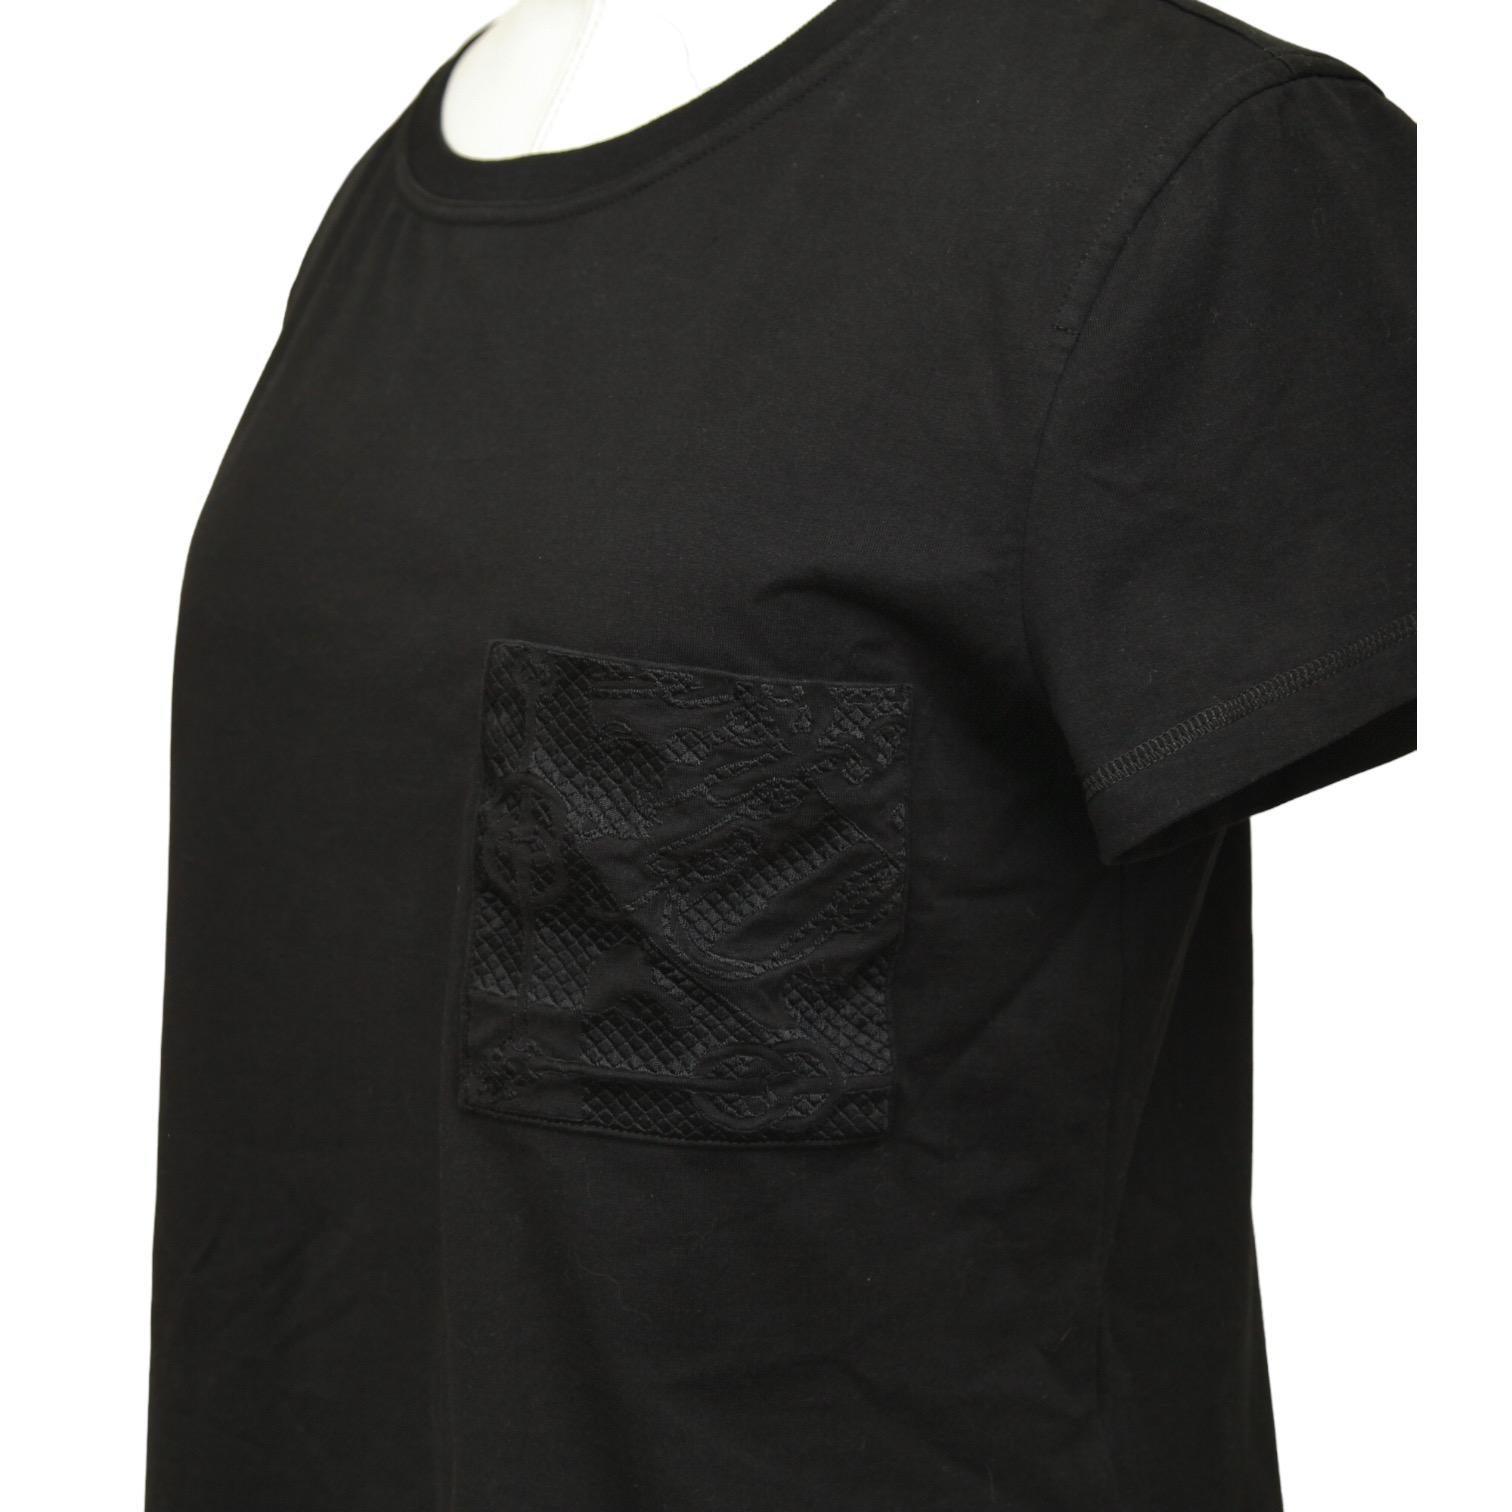 Women's HERMES Black T-Shirt Top Mosaique Embroidery Pocket Short Sleeve Crew Neck 38 For Sale